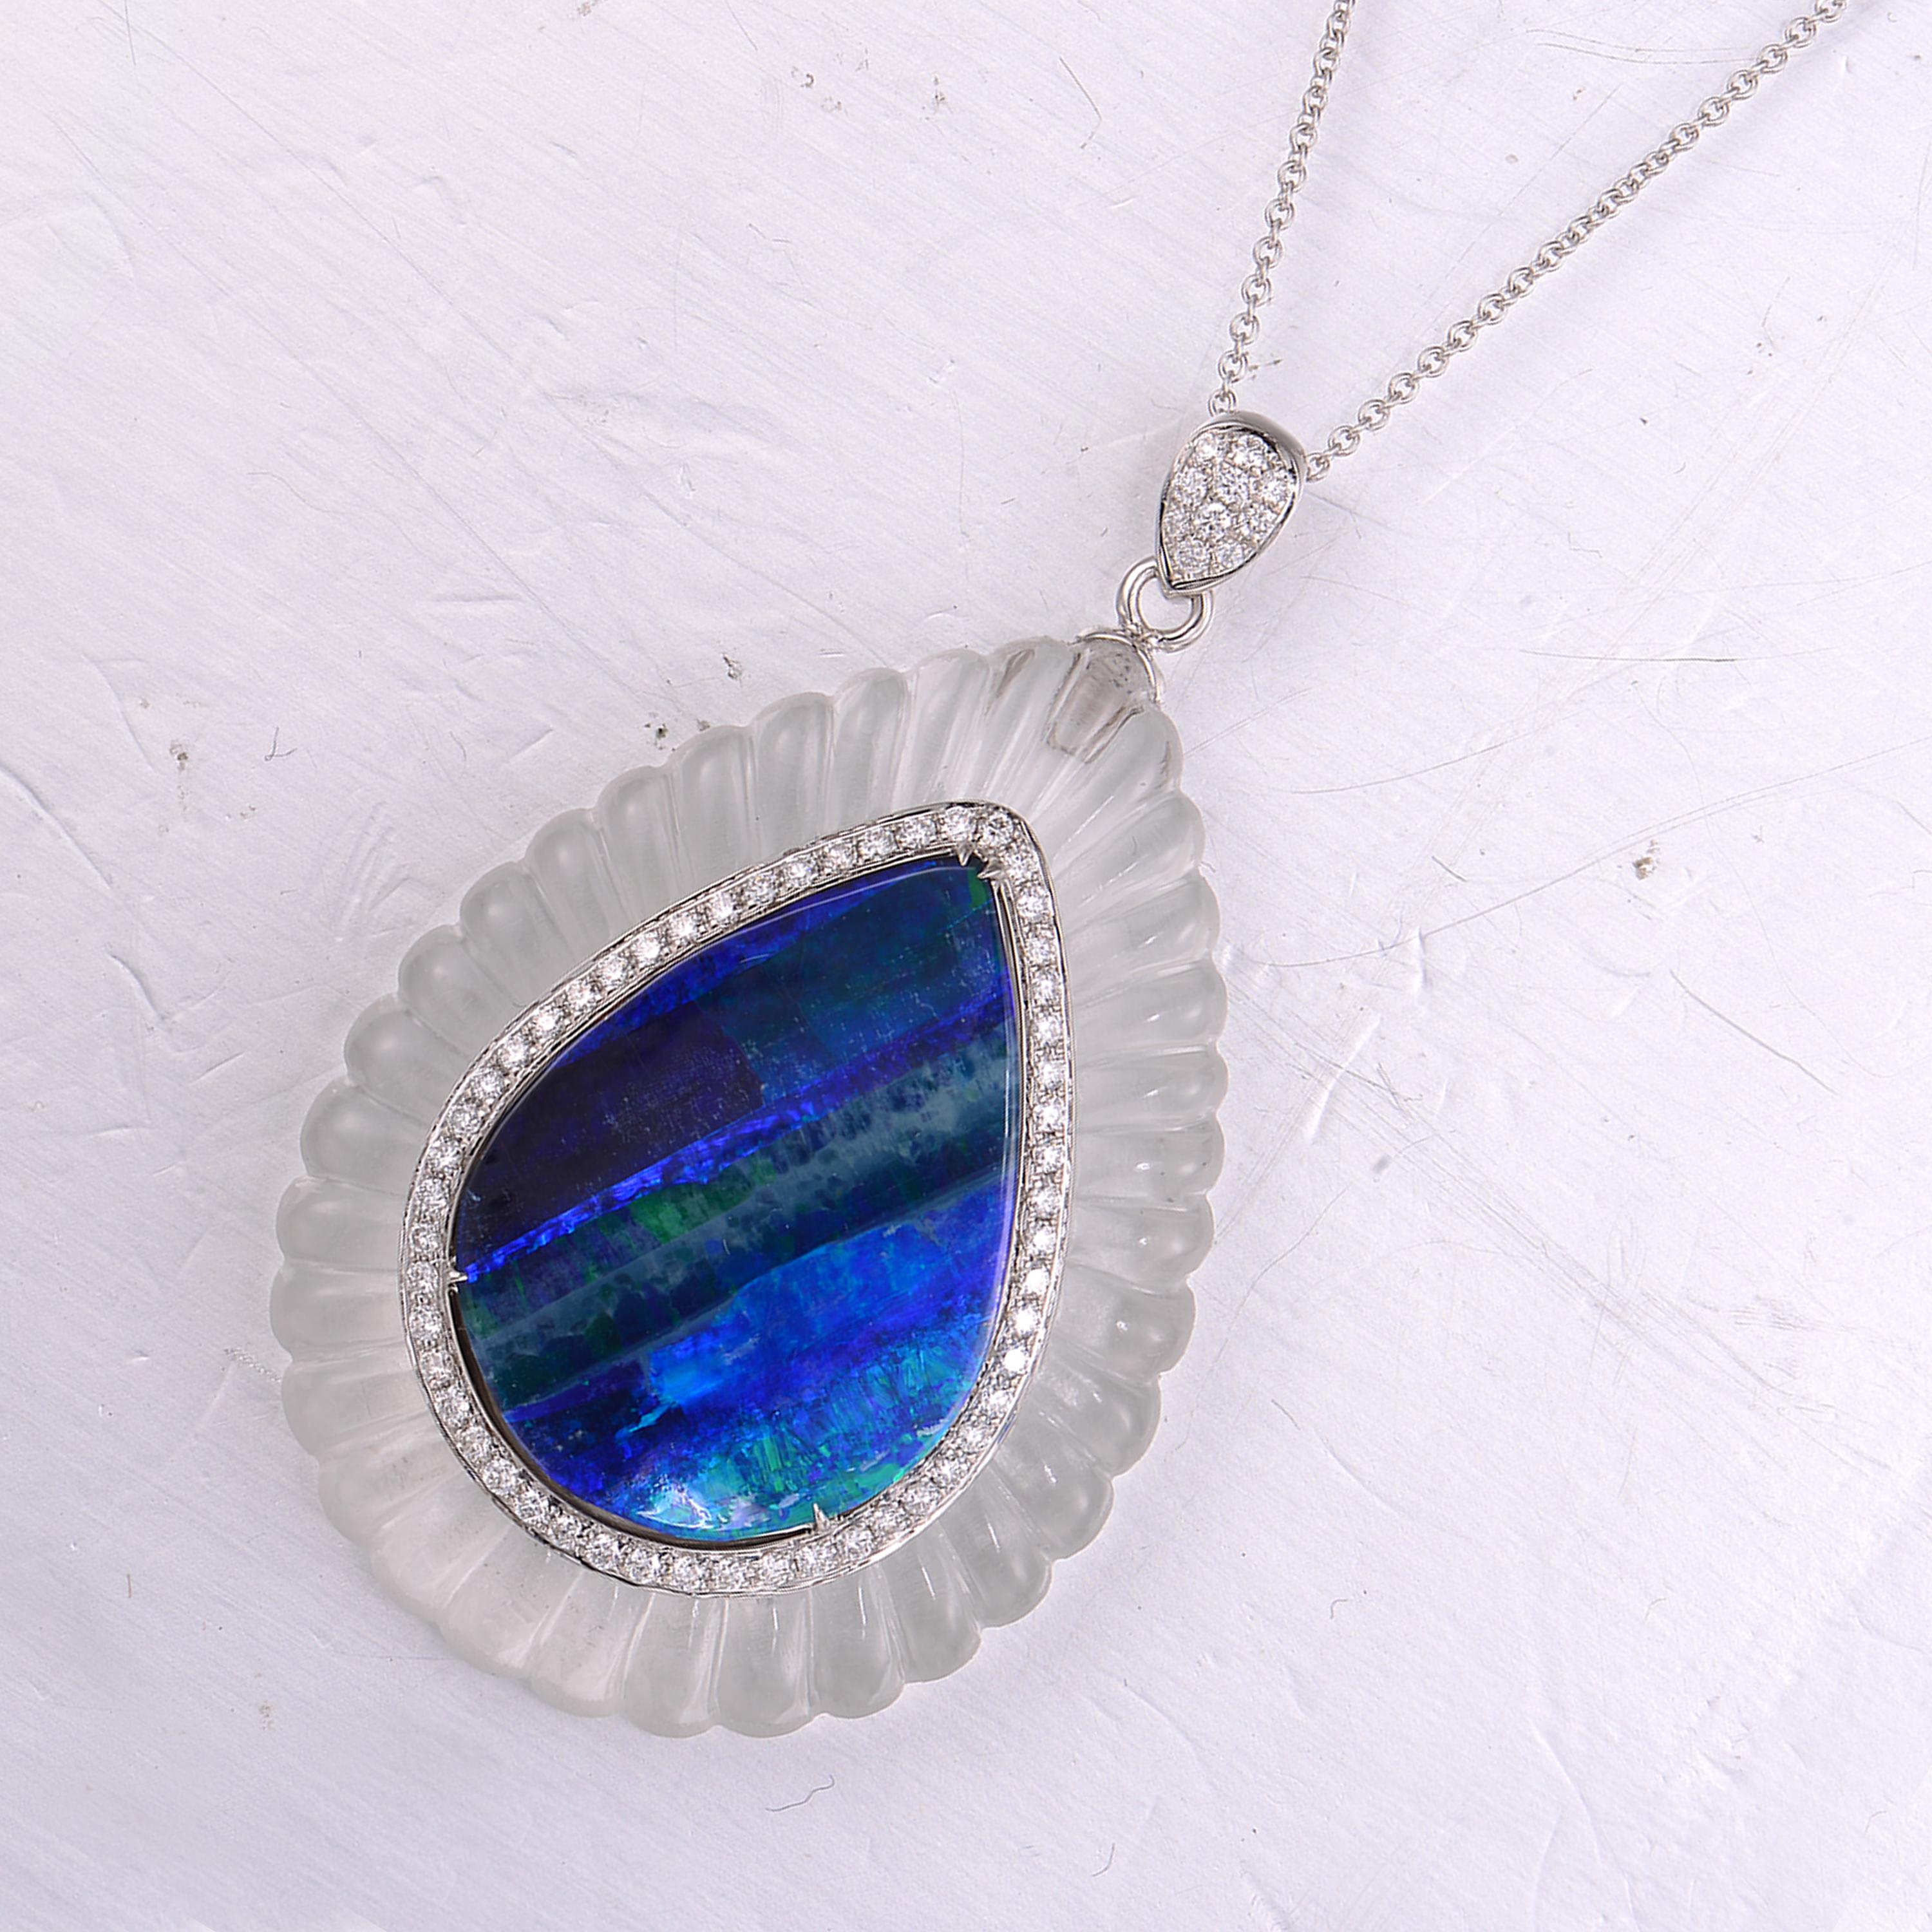 Description:
Painterly blue and green tear-shaped 8.4ct opal, decorated with brilliant 0.5ct diamonds and  57.25ct scalloped rock crystal. The matte finished rock crystal not only adds a modern touch to an Art Deco-inspired piece but also